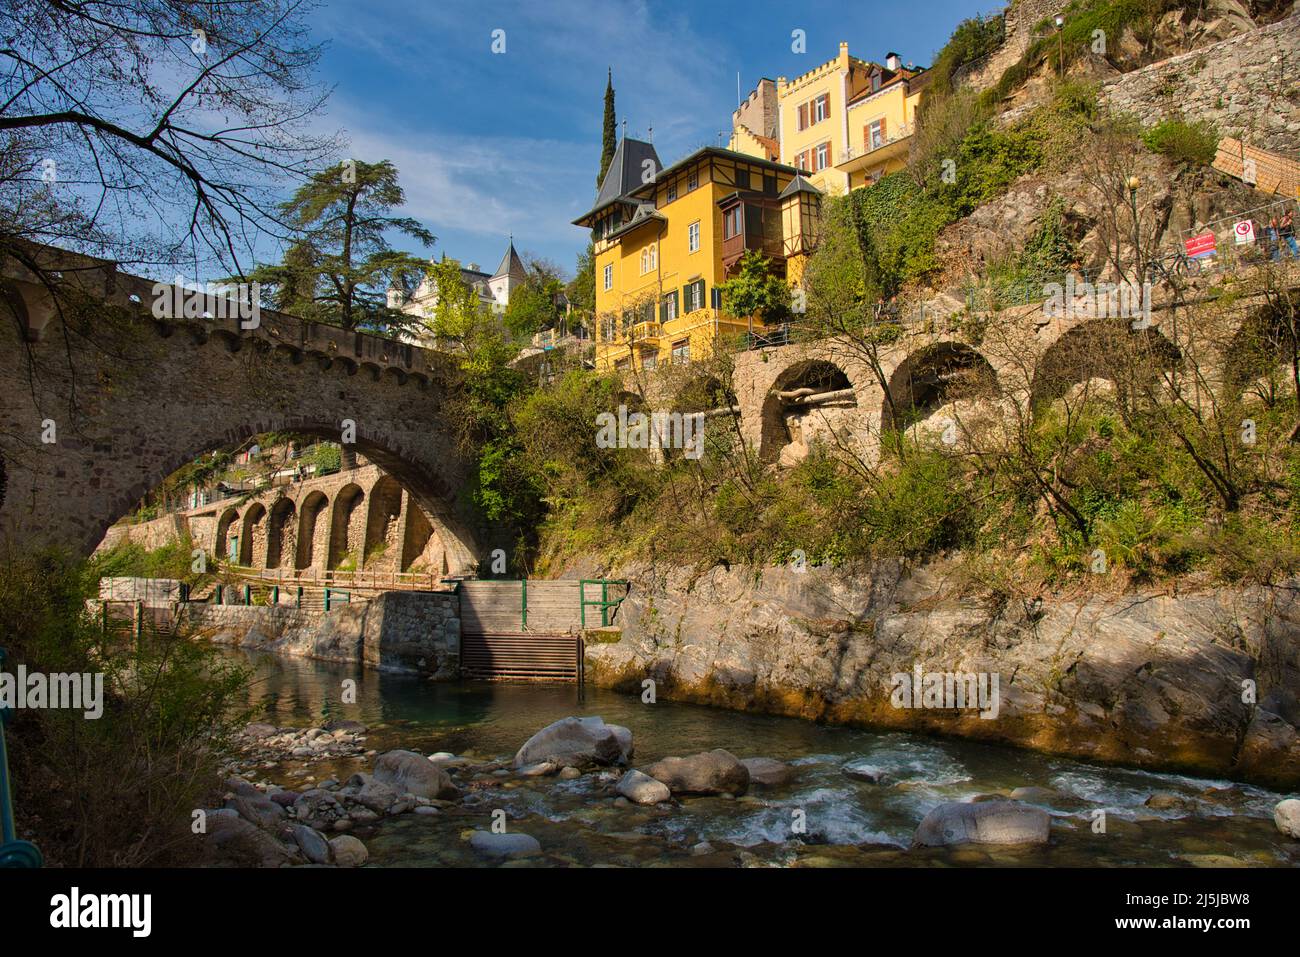 City of Meran in South Tyrol in Italy Stock Photo